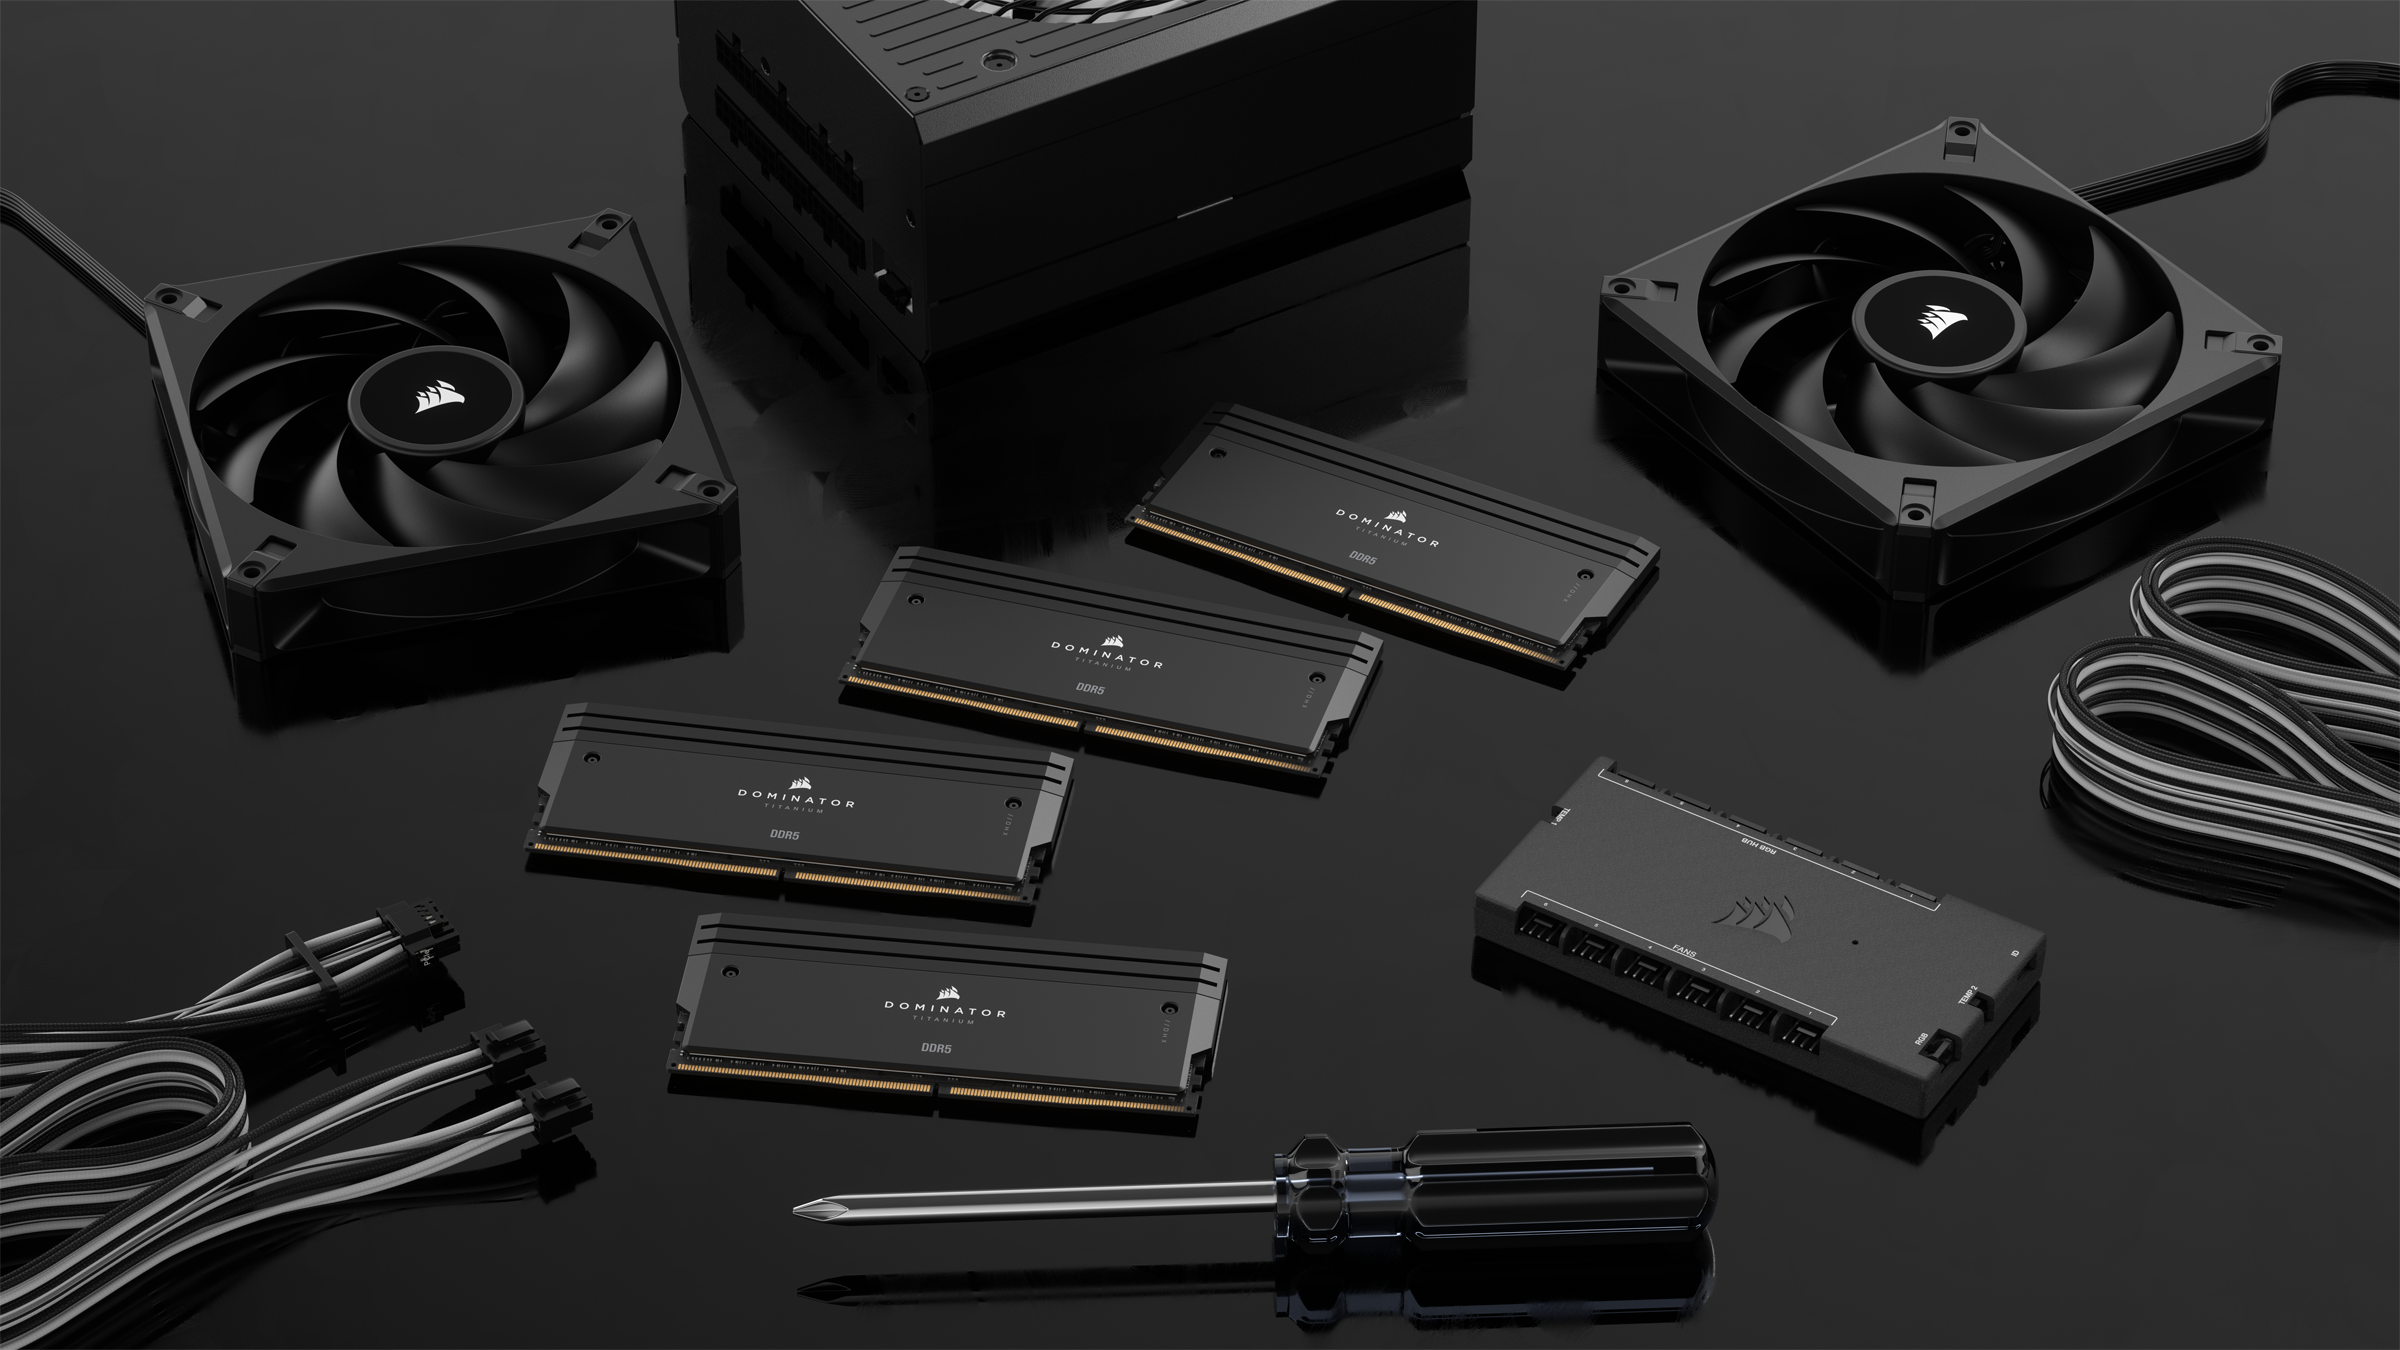 CORSAIR Announces DDR5 Memory Featuring AMD EXPO Technology